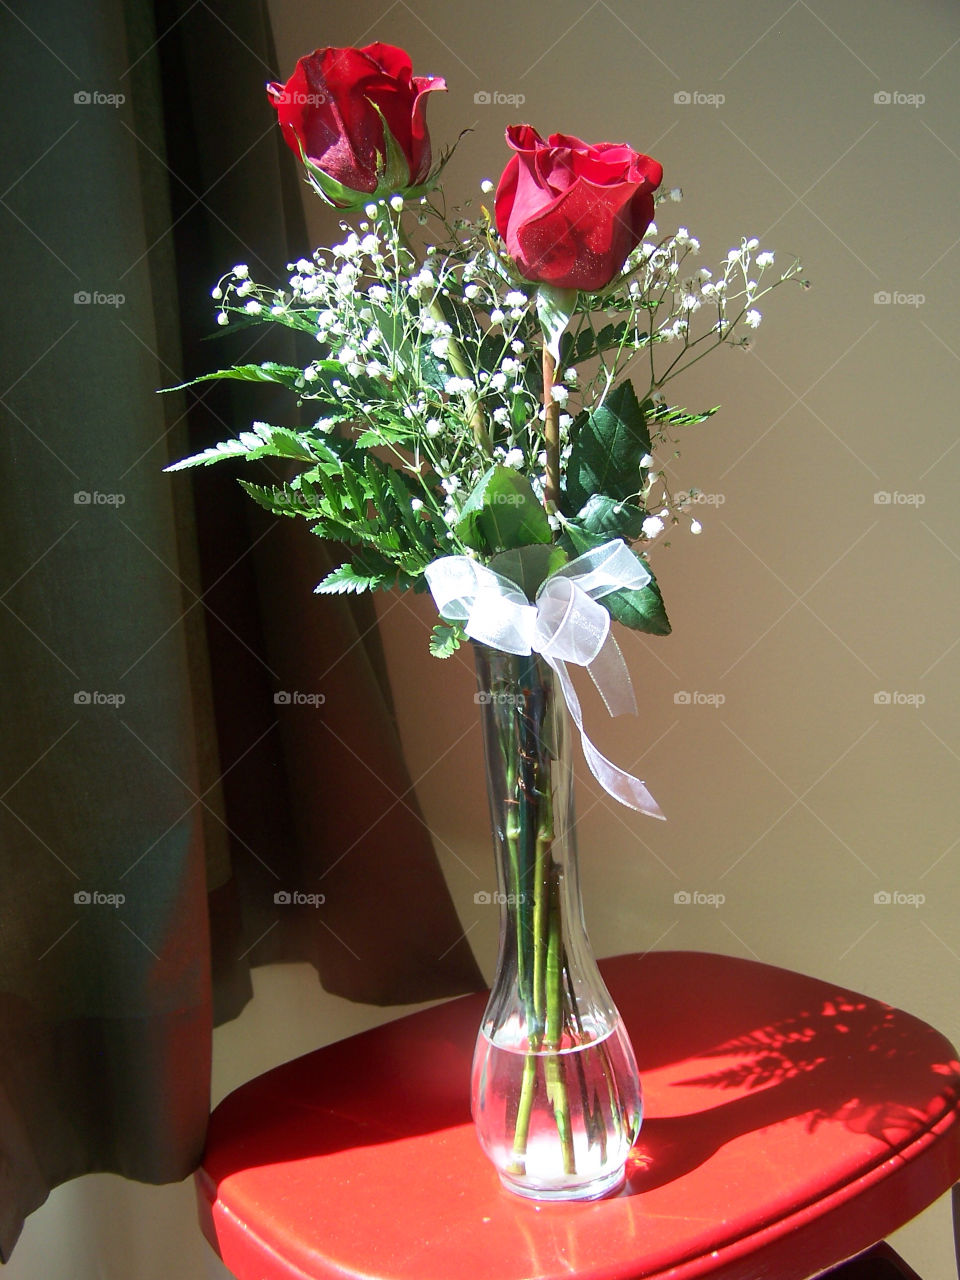 red roses sunlight vase by ashley77